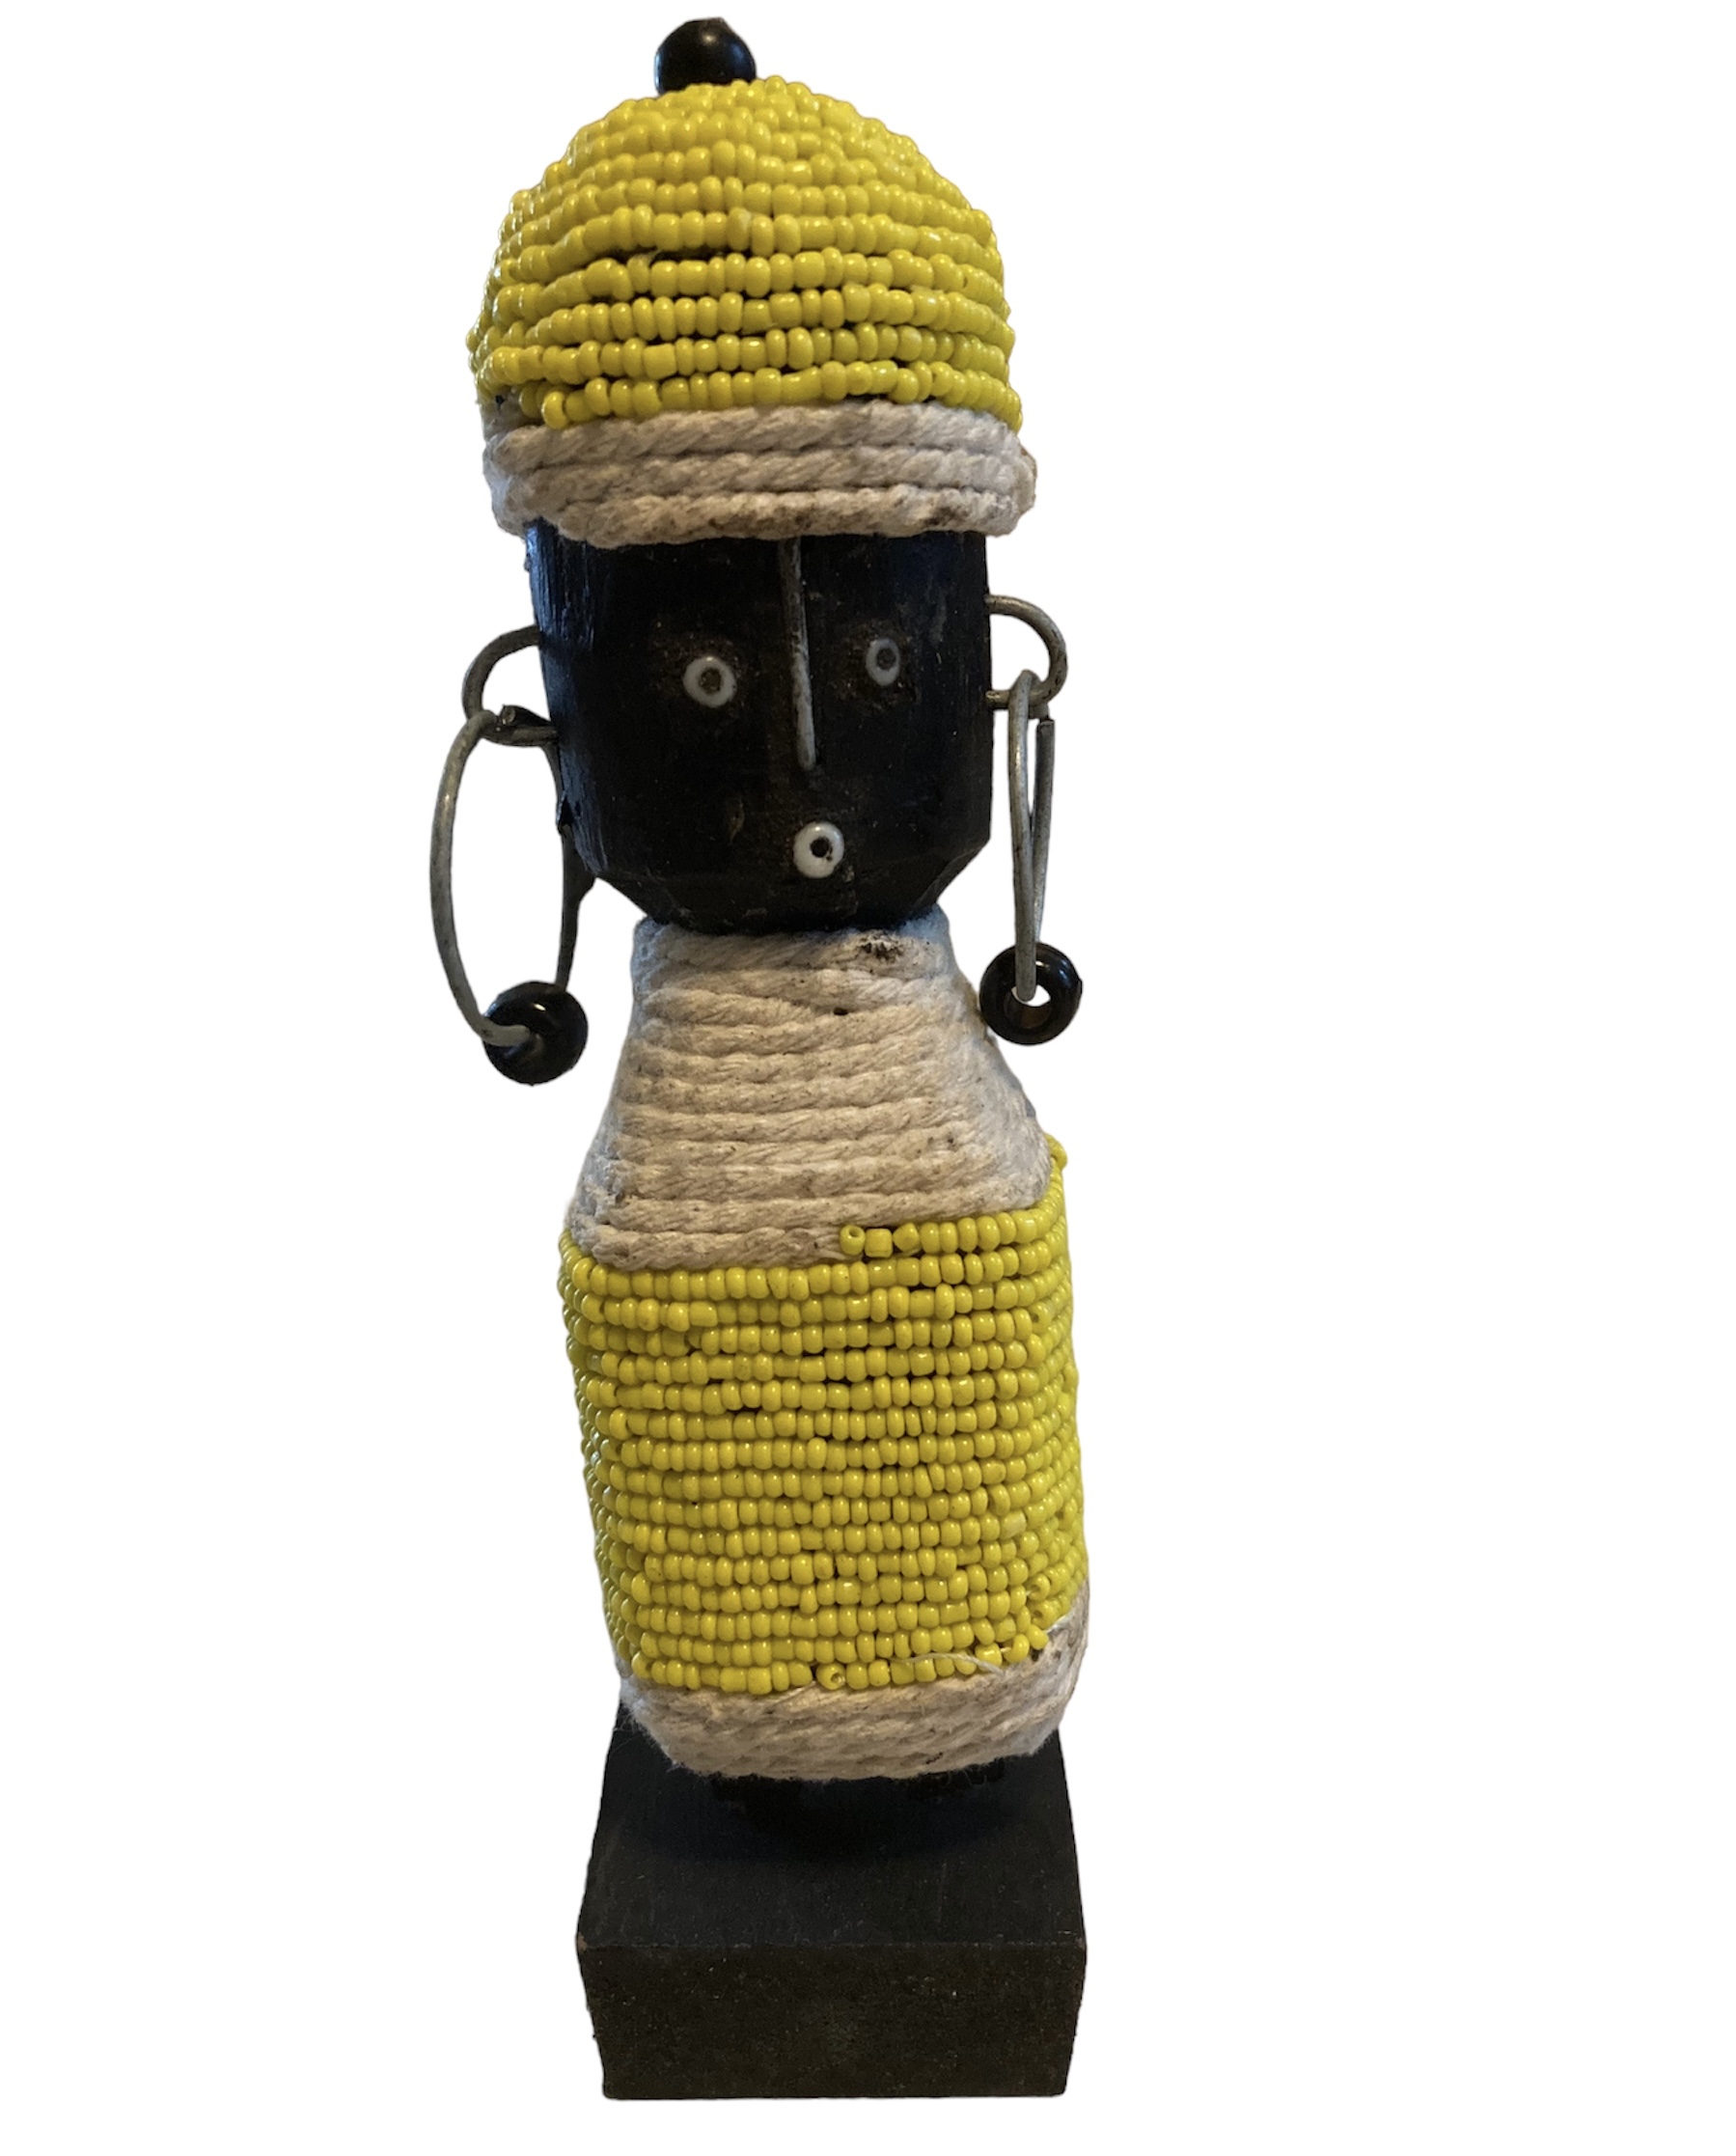 Namji Doll from Cameroon - Small - 005